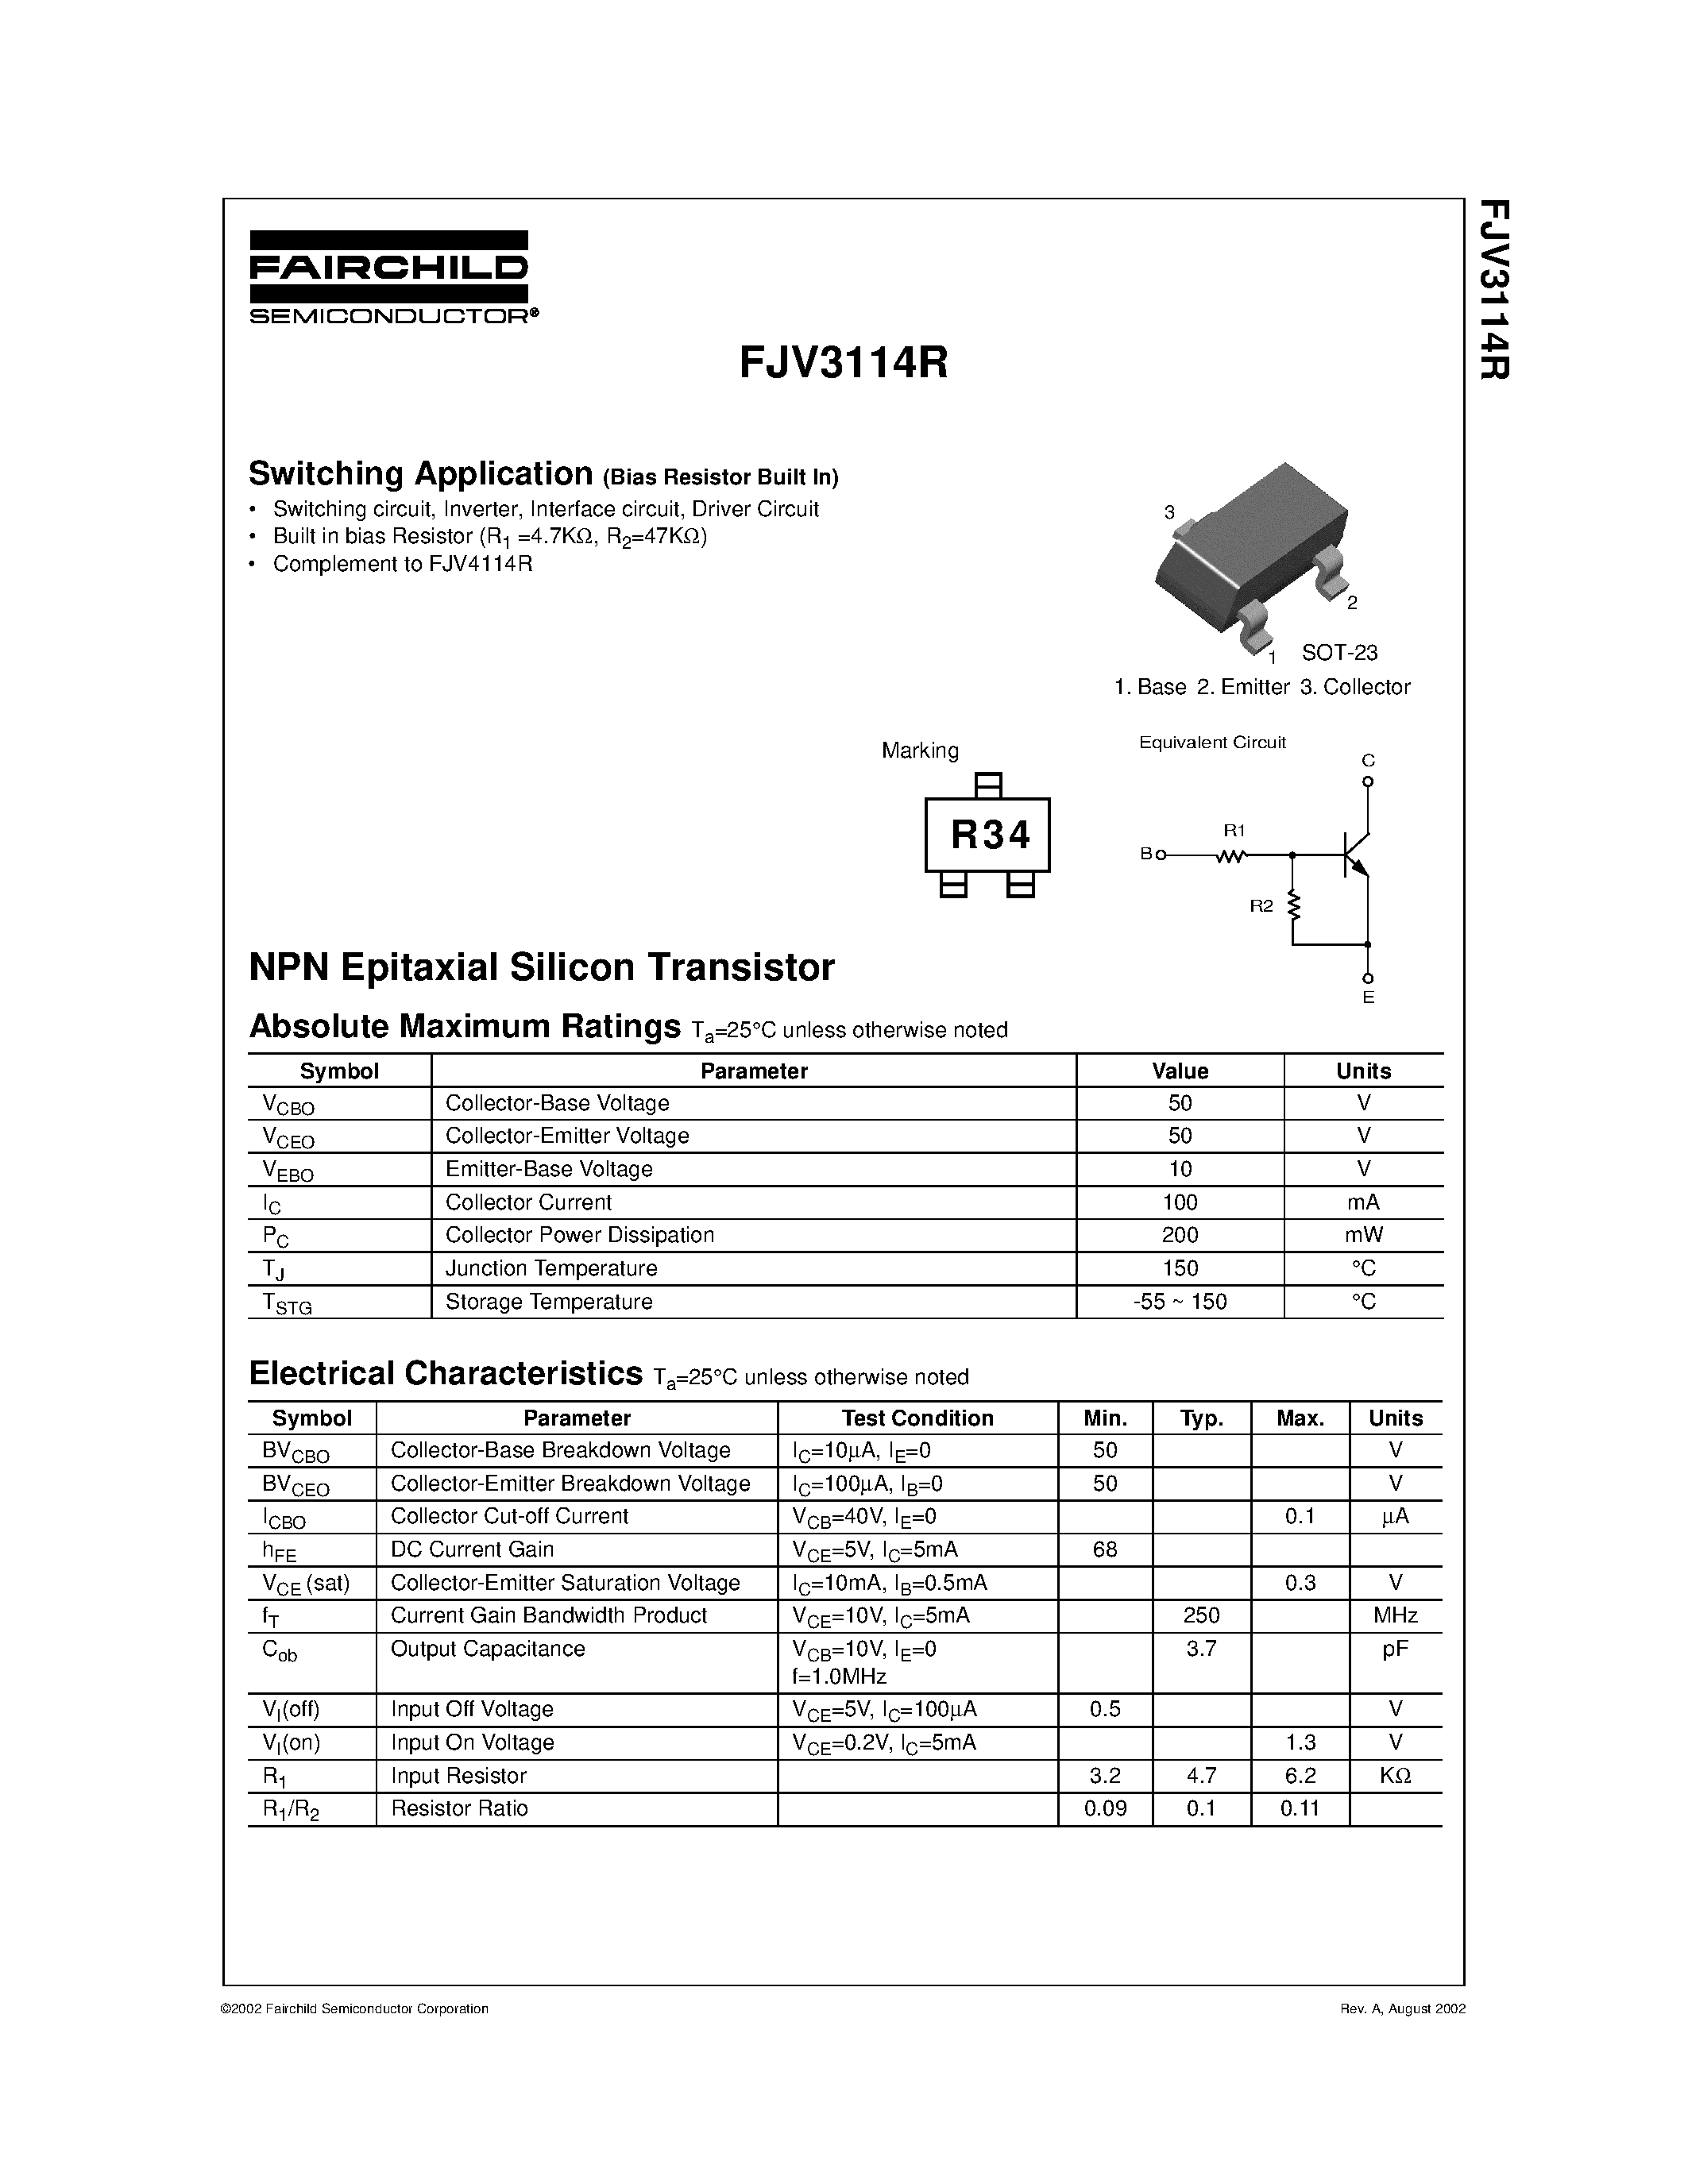 Datasheet FJV3114R - NPN Epitaxial Silicon Transistor page 1